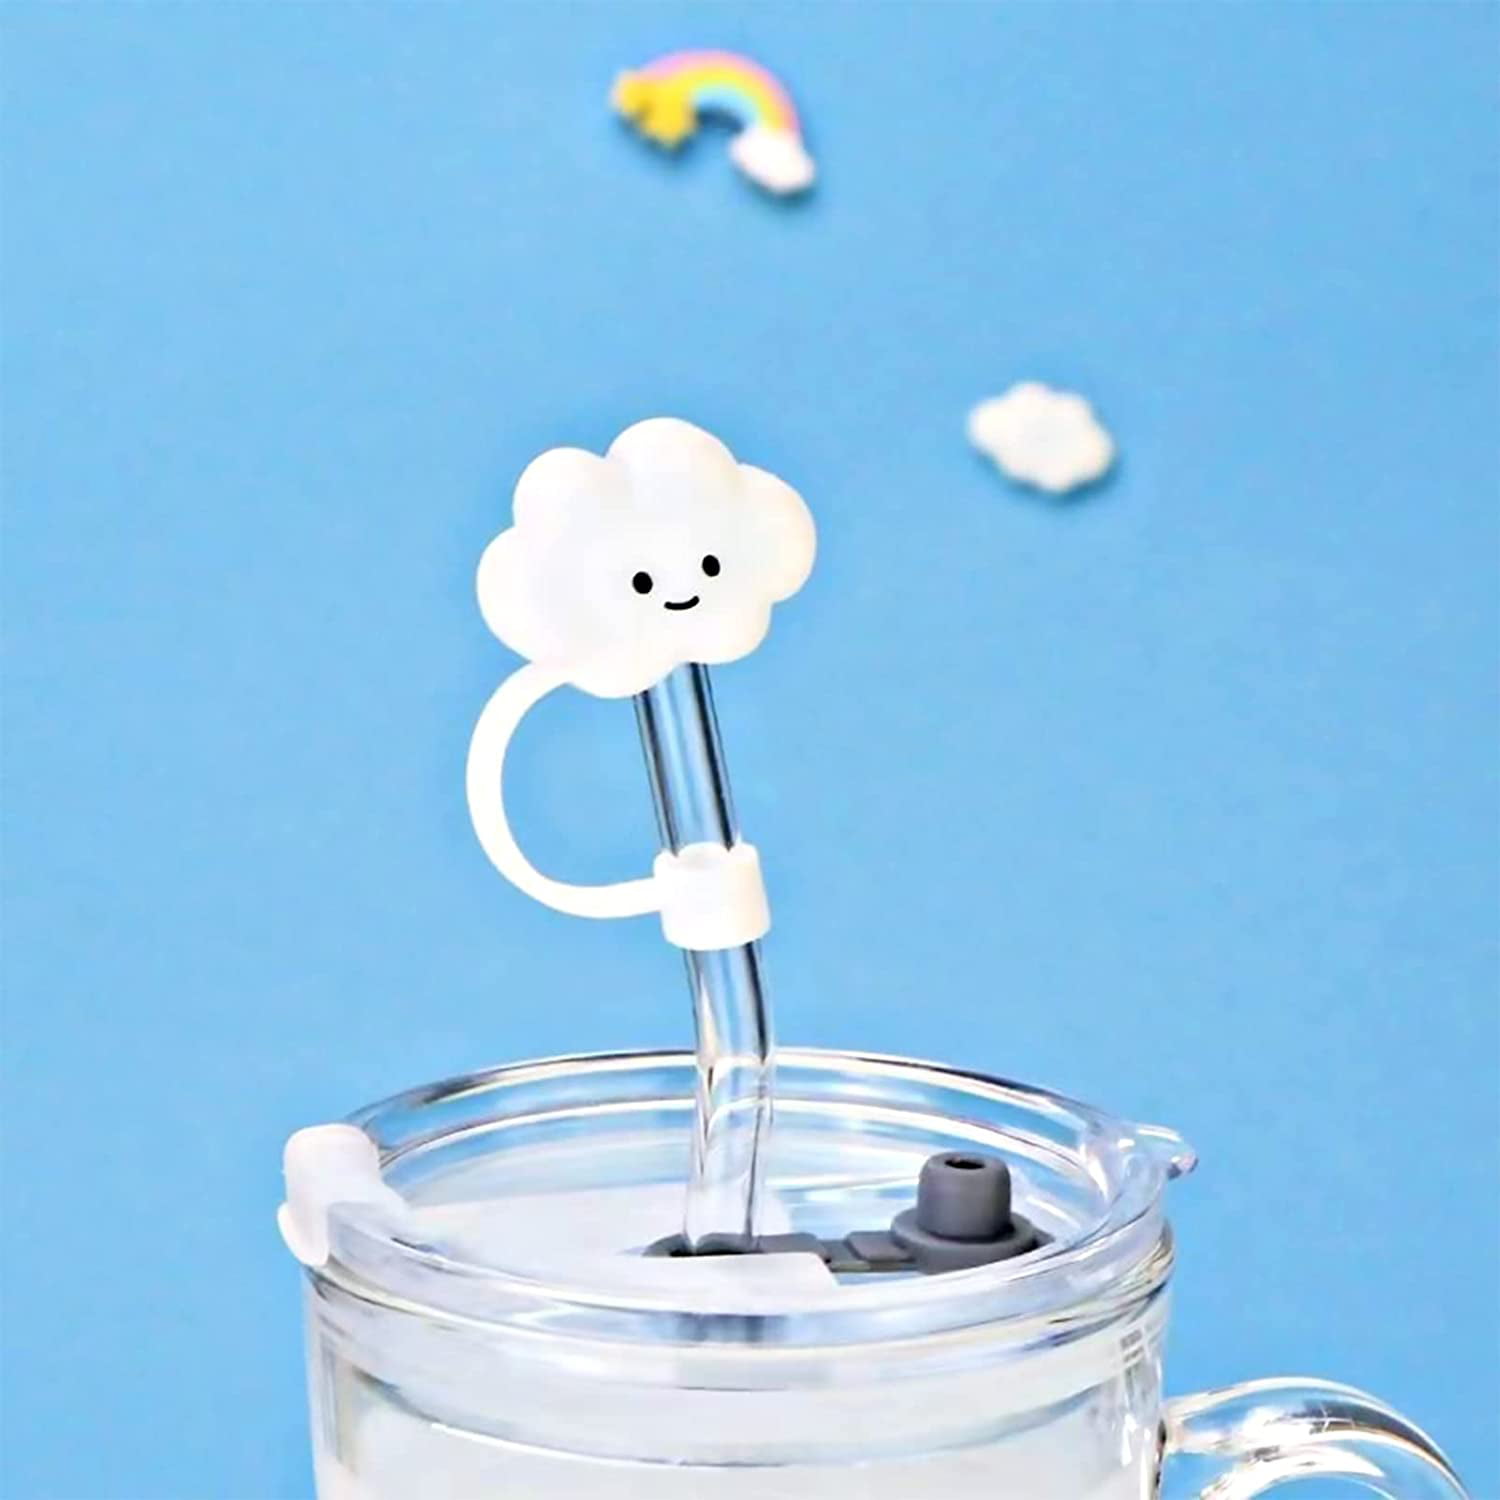  4Pcs Silicone Straw Covers Cap, Straw Tips Cover Straw Covers  Cap for Reusable Straws Cloud Shape Straw Protector. The Clouds, Rainbow,  Strawberry, Duck. : Health & Household